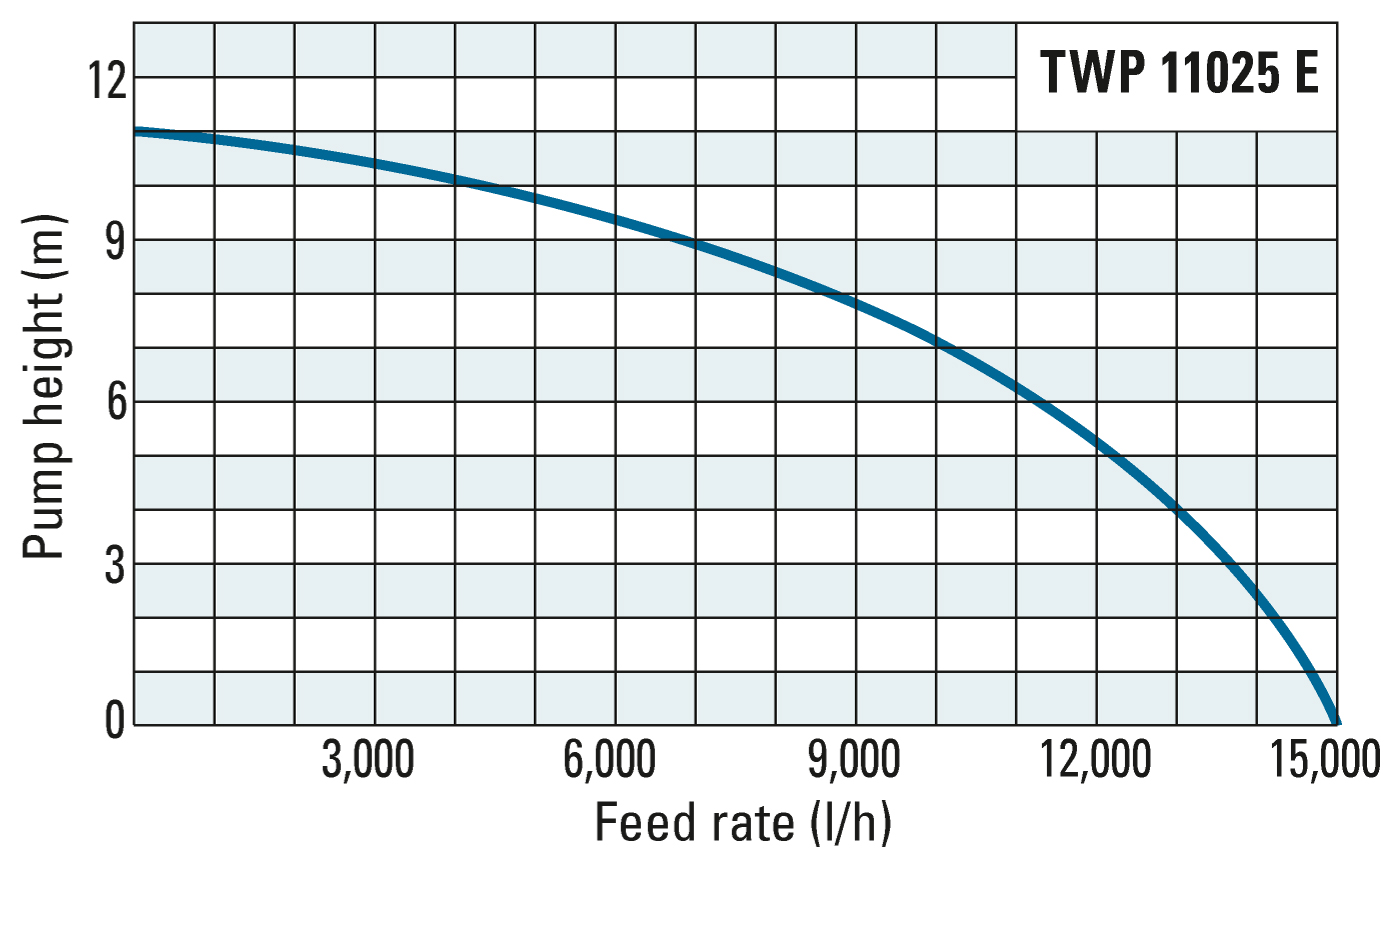 Delivery head and flow rate of the TWP 11025 E